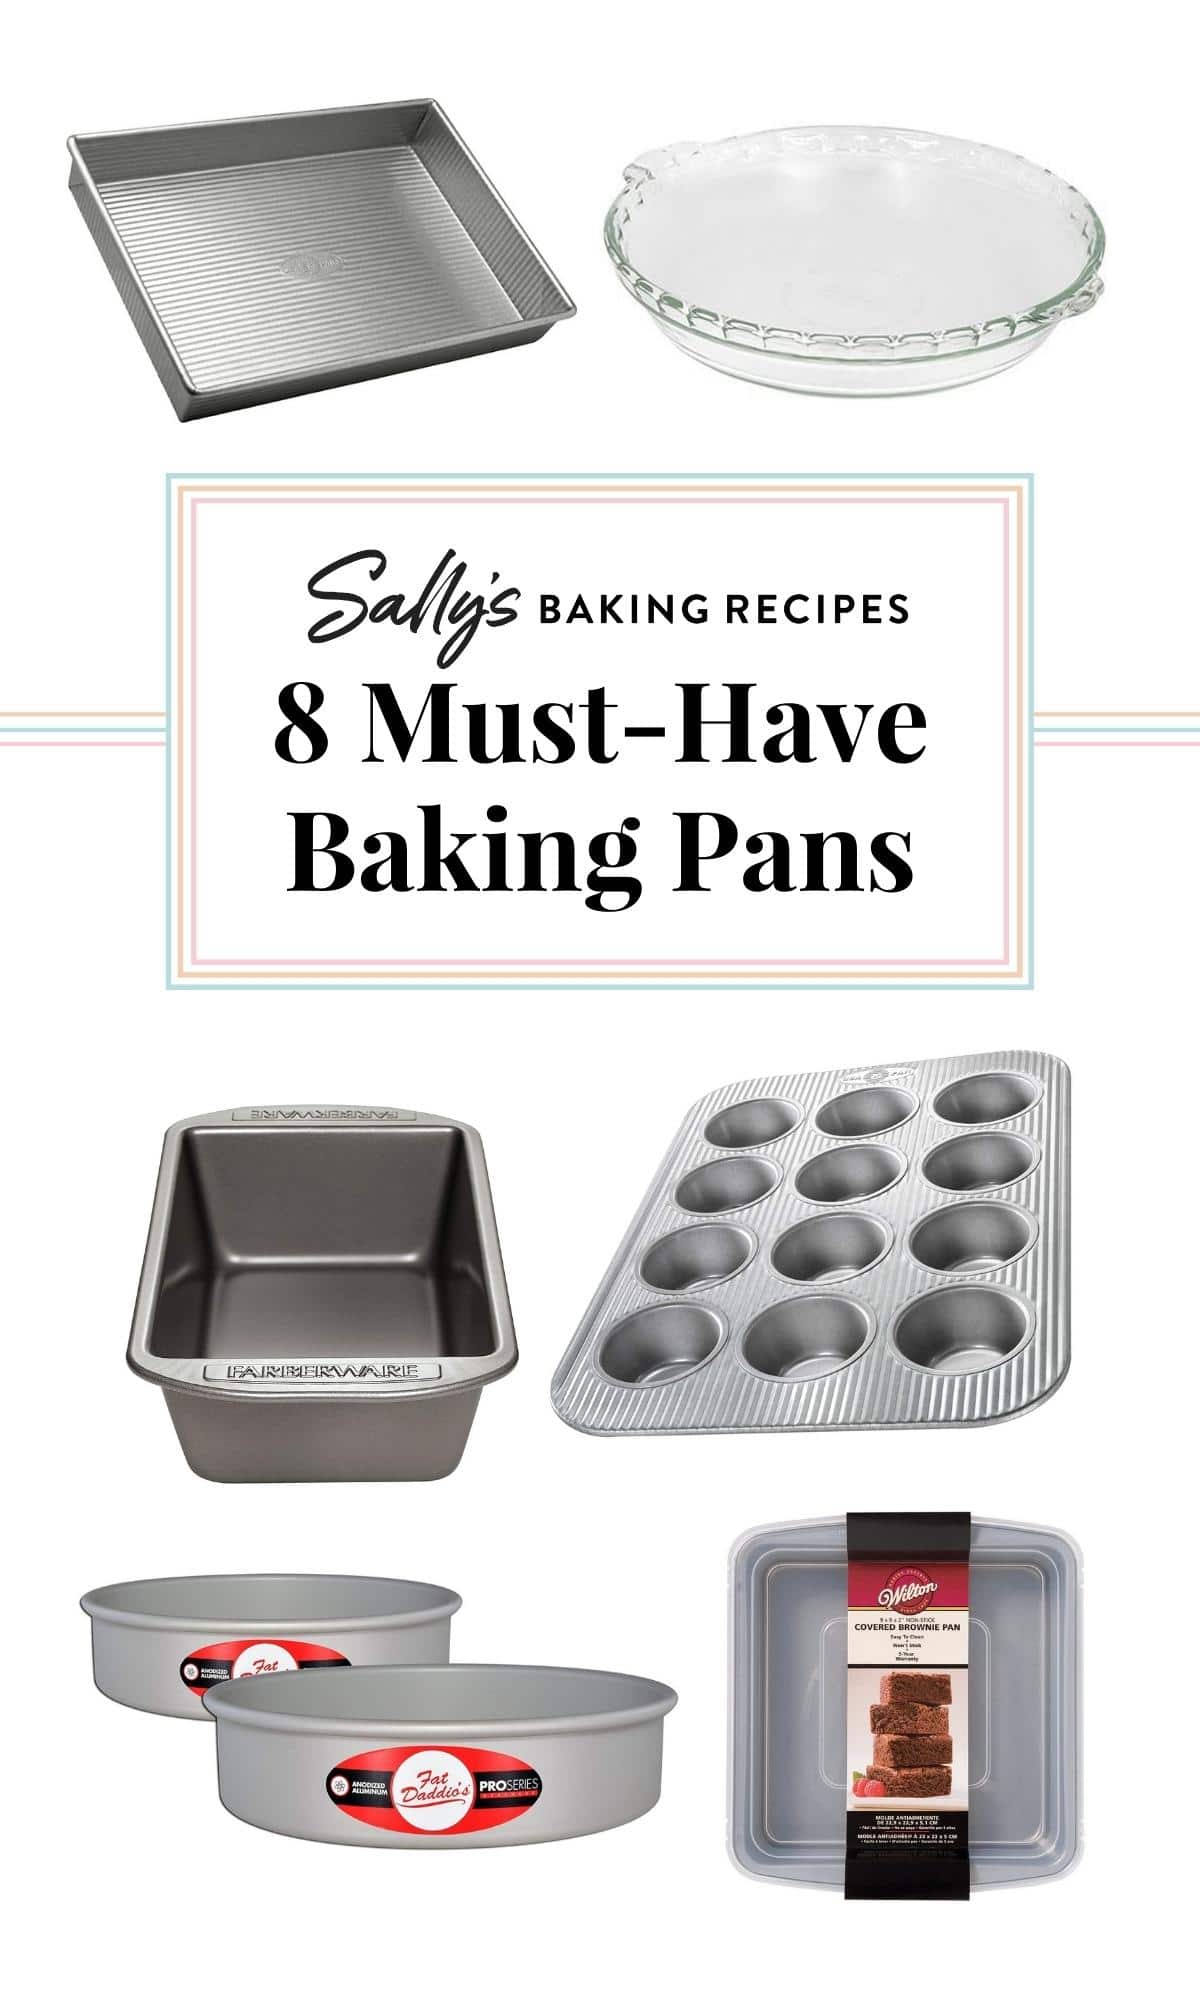 collage of baking pans with Sally's Baking Recipes logo